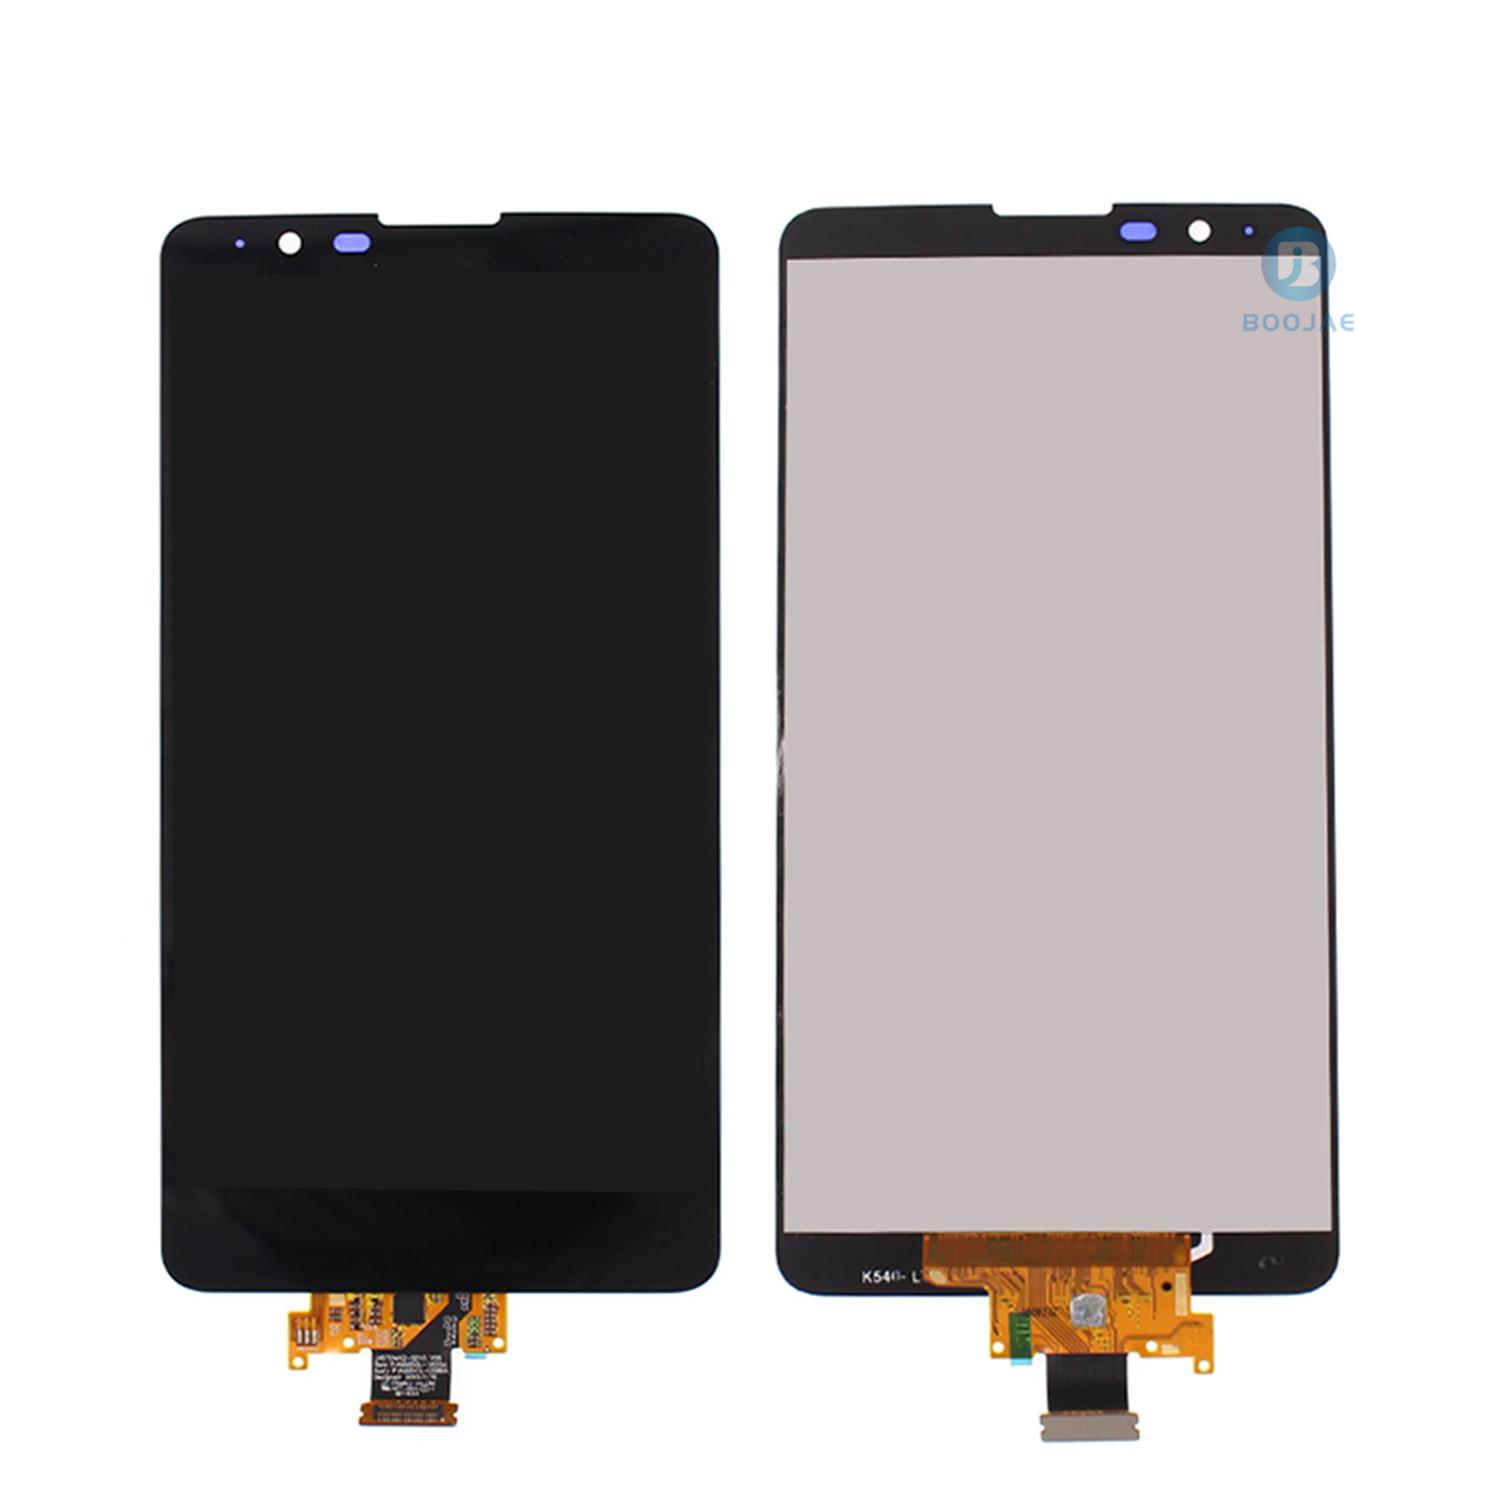 LG Stylus 2 LCD Screen Display, Lcd Assembly Replacement